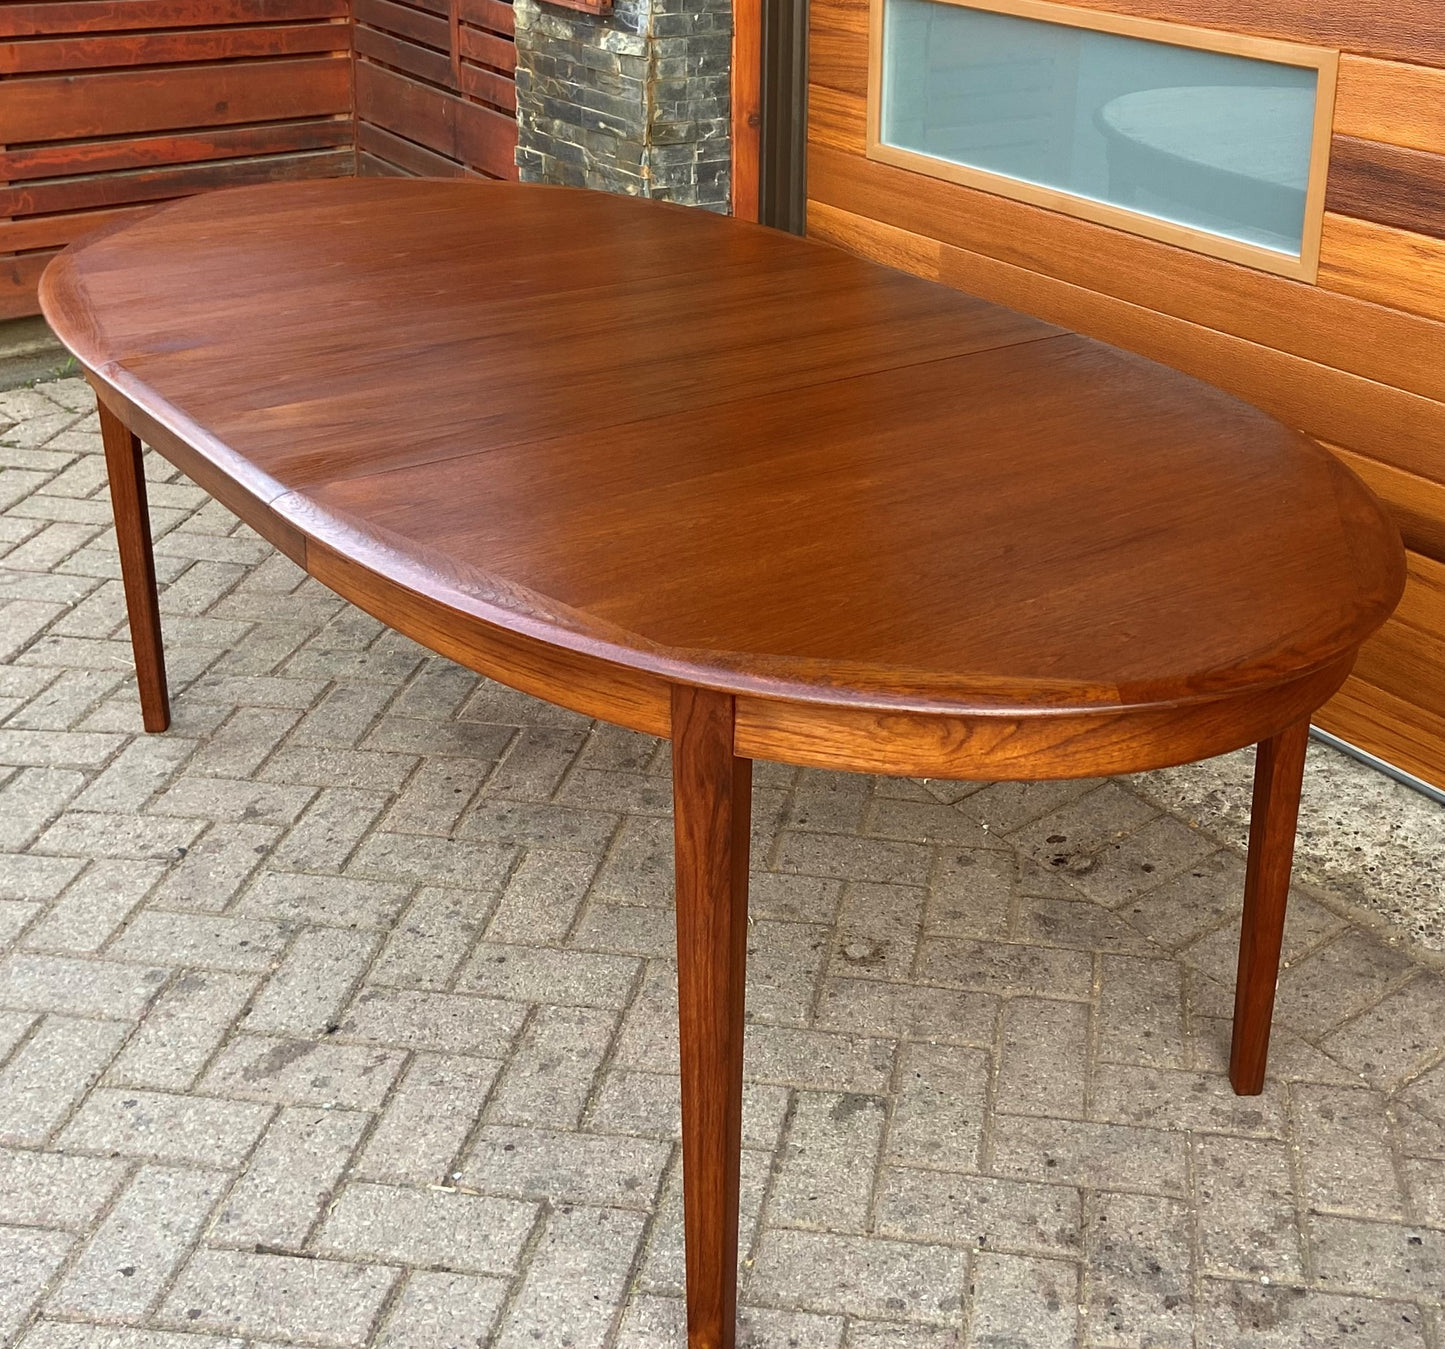 REFINISHED Danish Mid Century Modern Teak Table w 2 Leaves by A.H.Olsen, 64"-103"